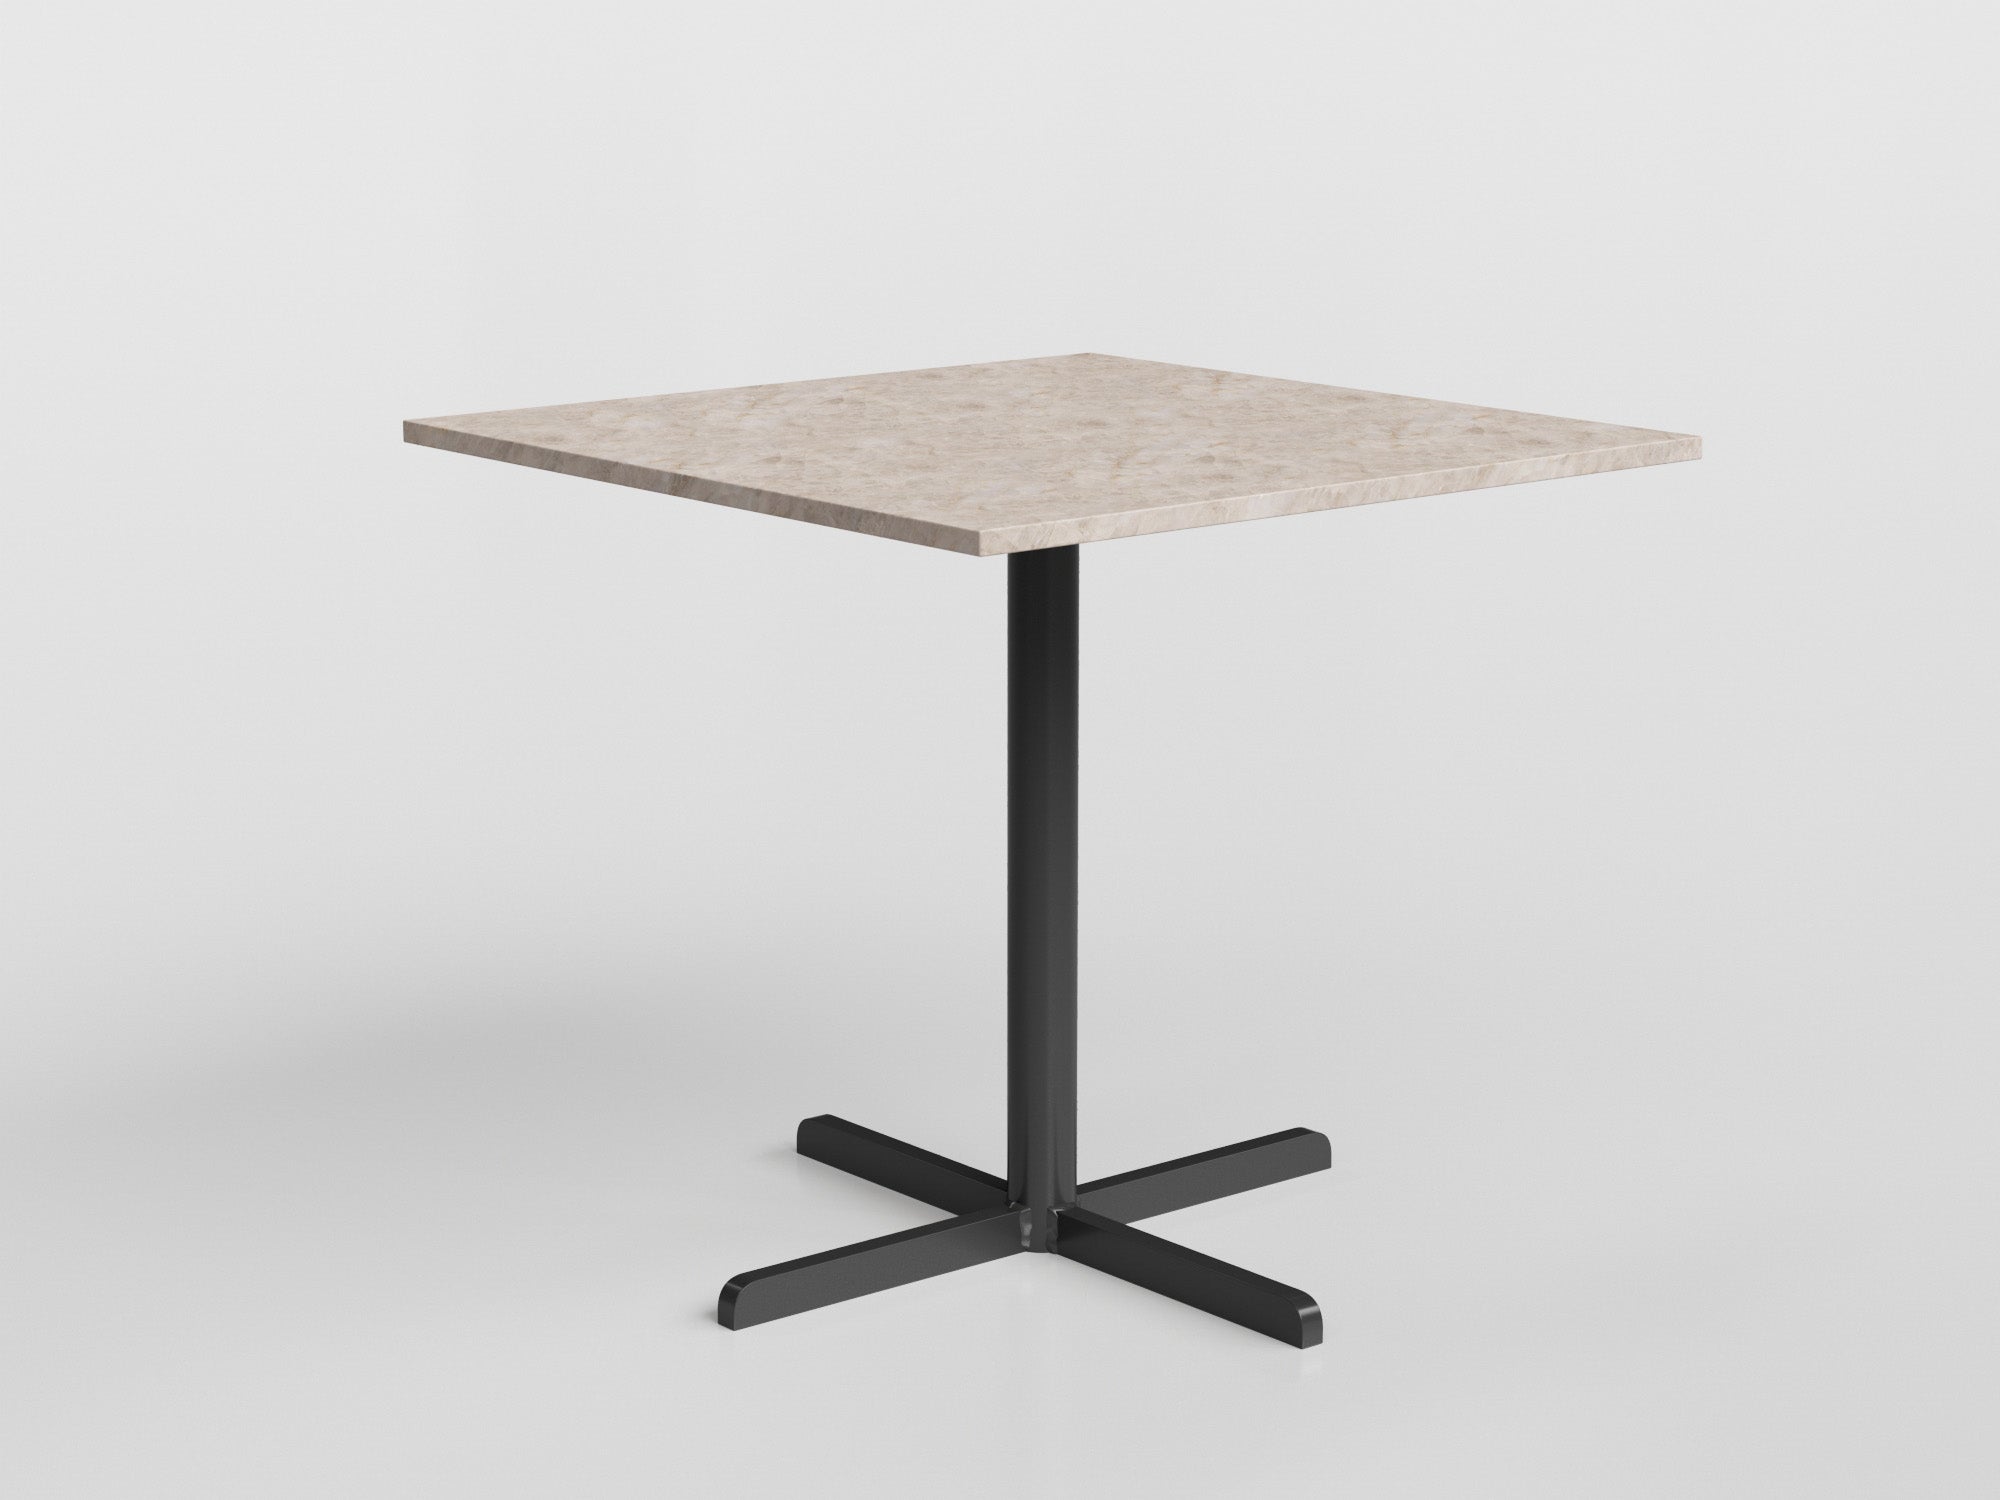 Flex Square Table with aluminum frames and HPL Top, designed by Tatiana Mandelli